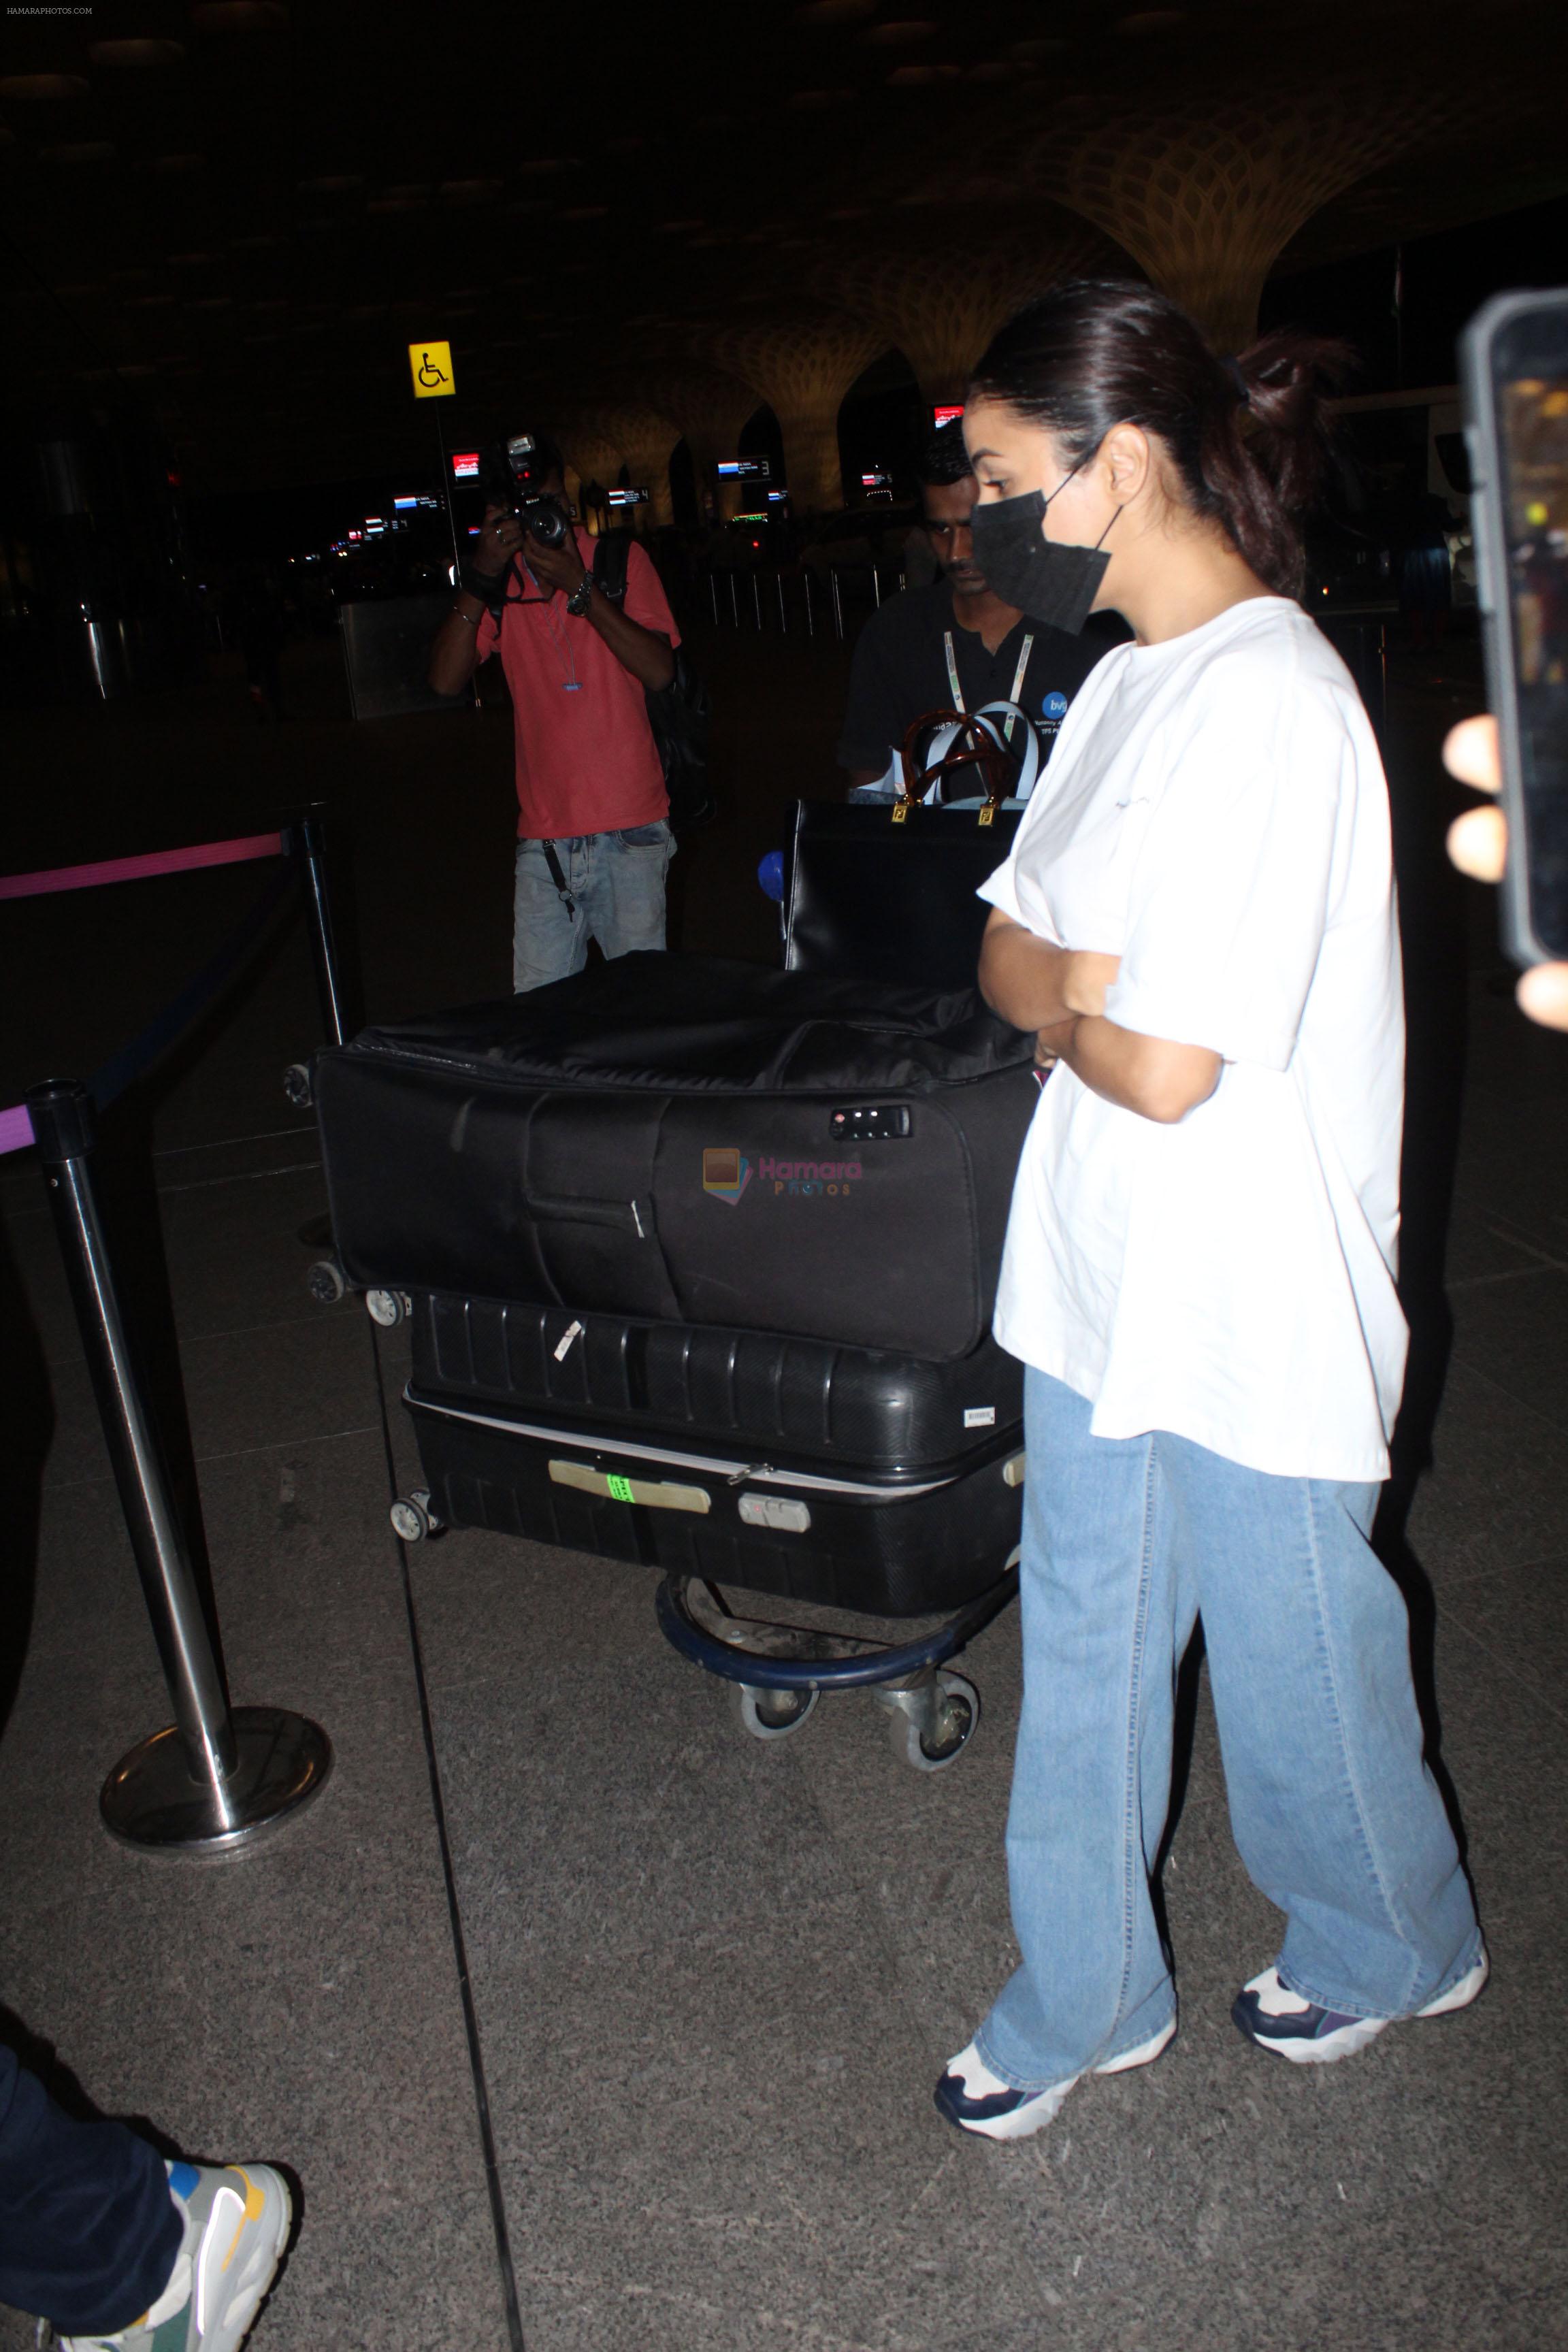 Shehnaaz Kaur Gill wearing white t-shirt and blue jeans spotted at airport on 14 Jun 2023